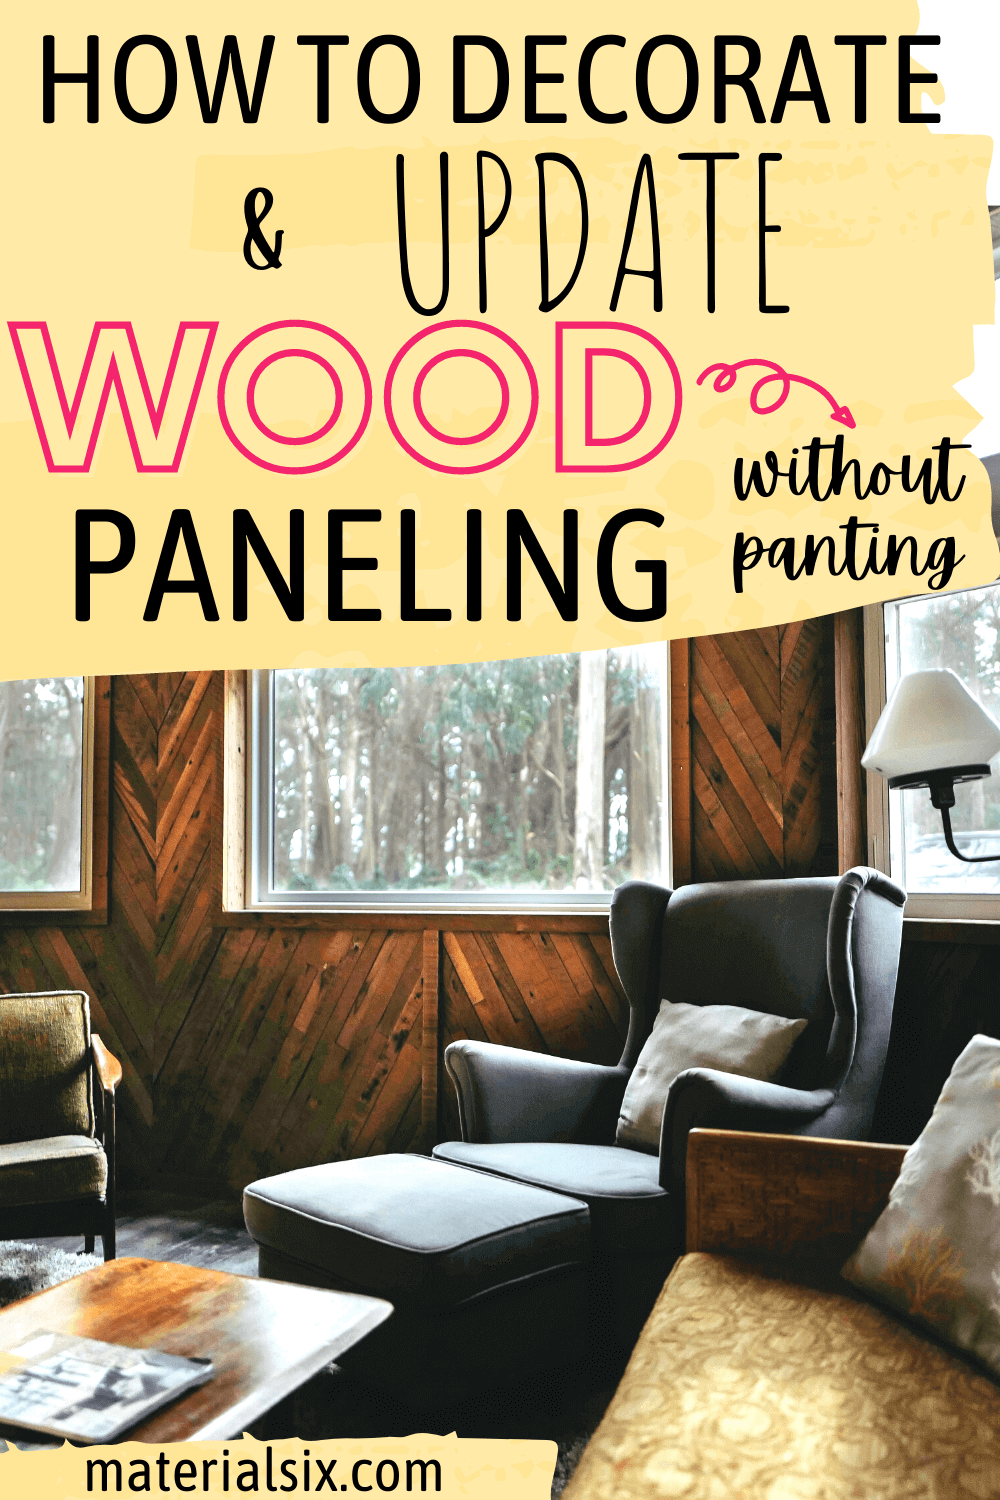 How to decorate wood paneling without painting